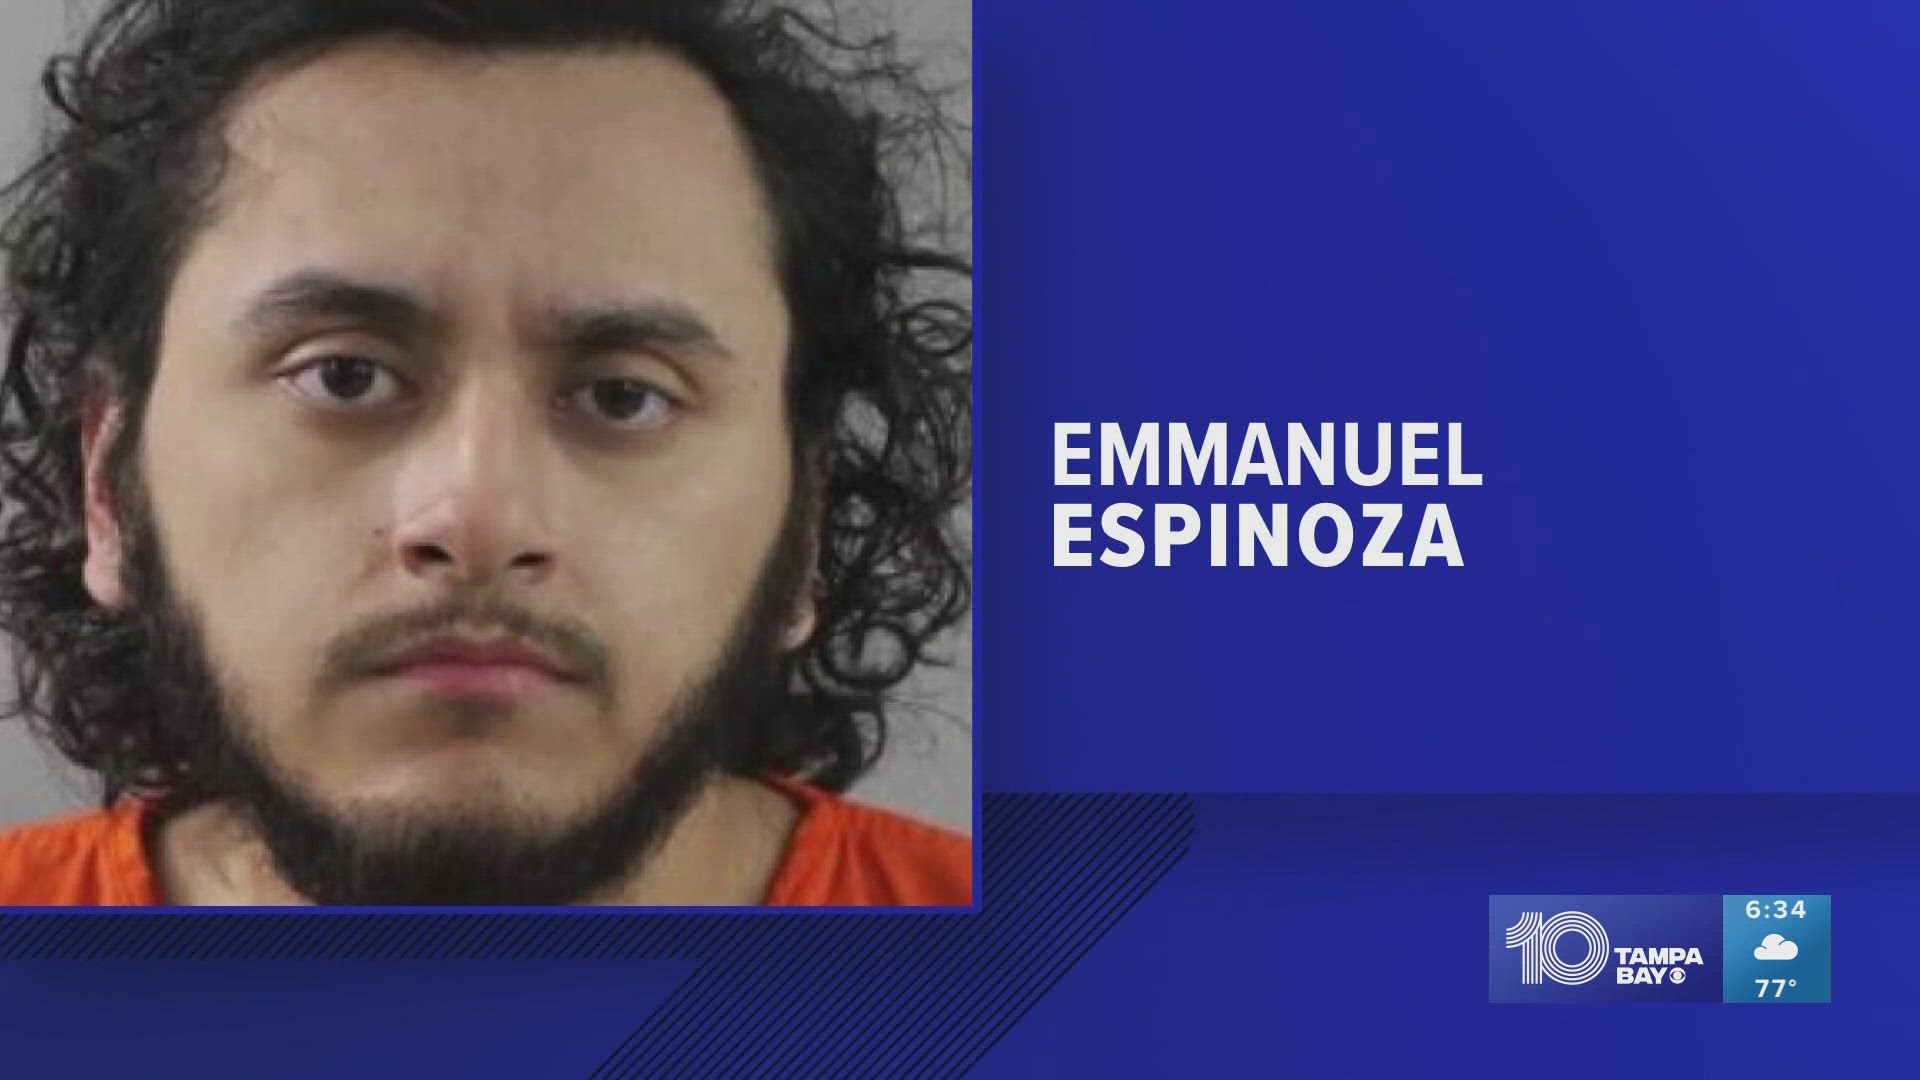 Emmanuel Espinoza told deputies his mother got on his nerves and he wanted to kill her for a long time. He's accused of stabbing her 70 times.